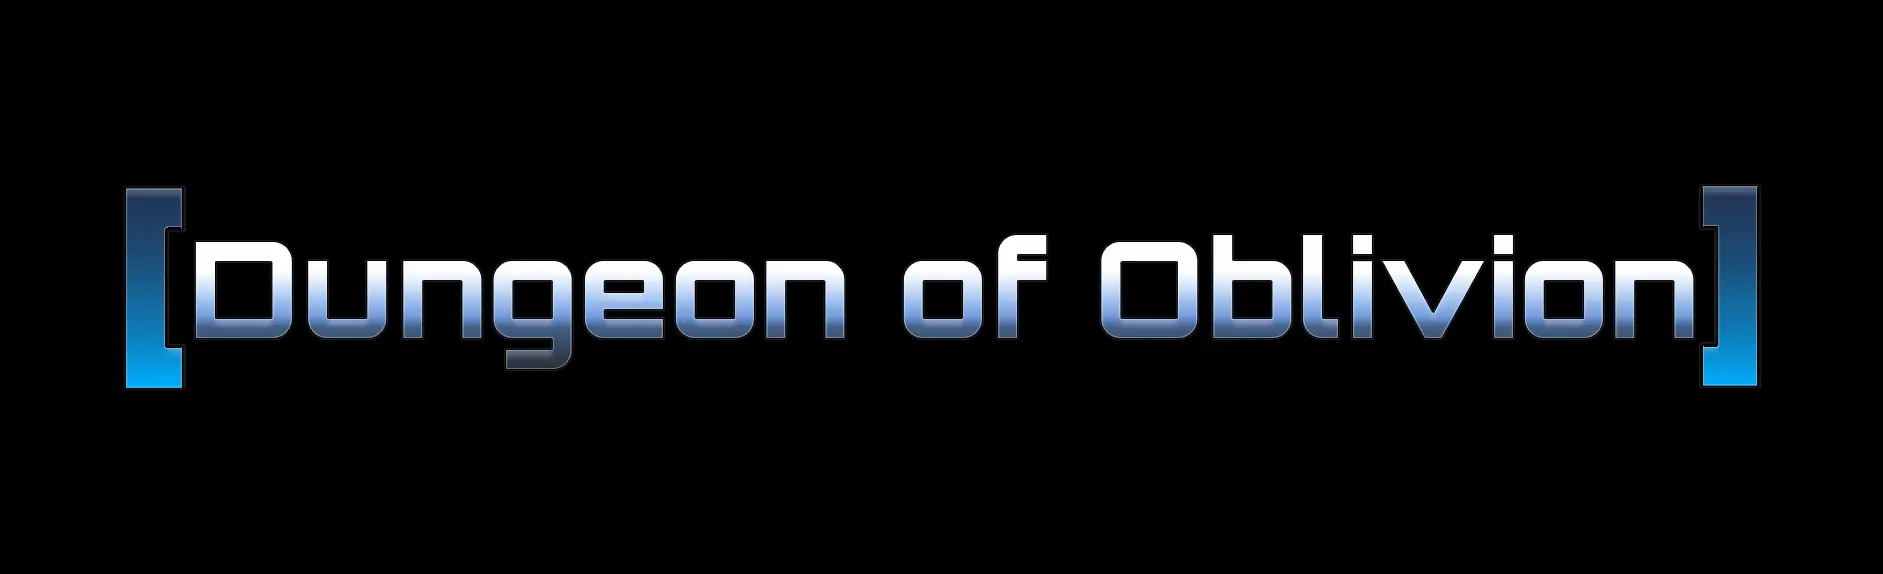 Dungeon of Oblivion main image